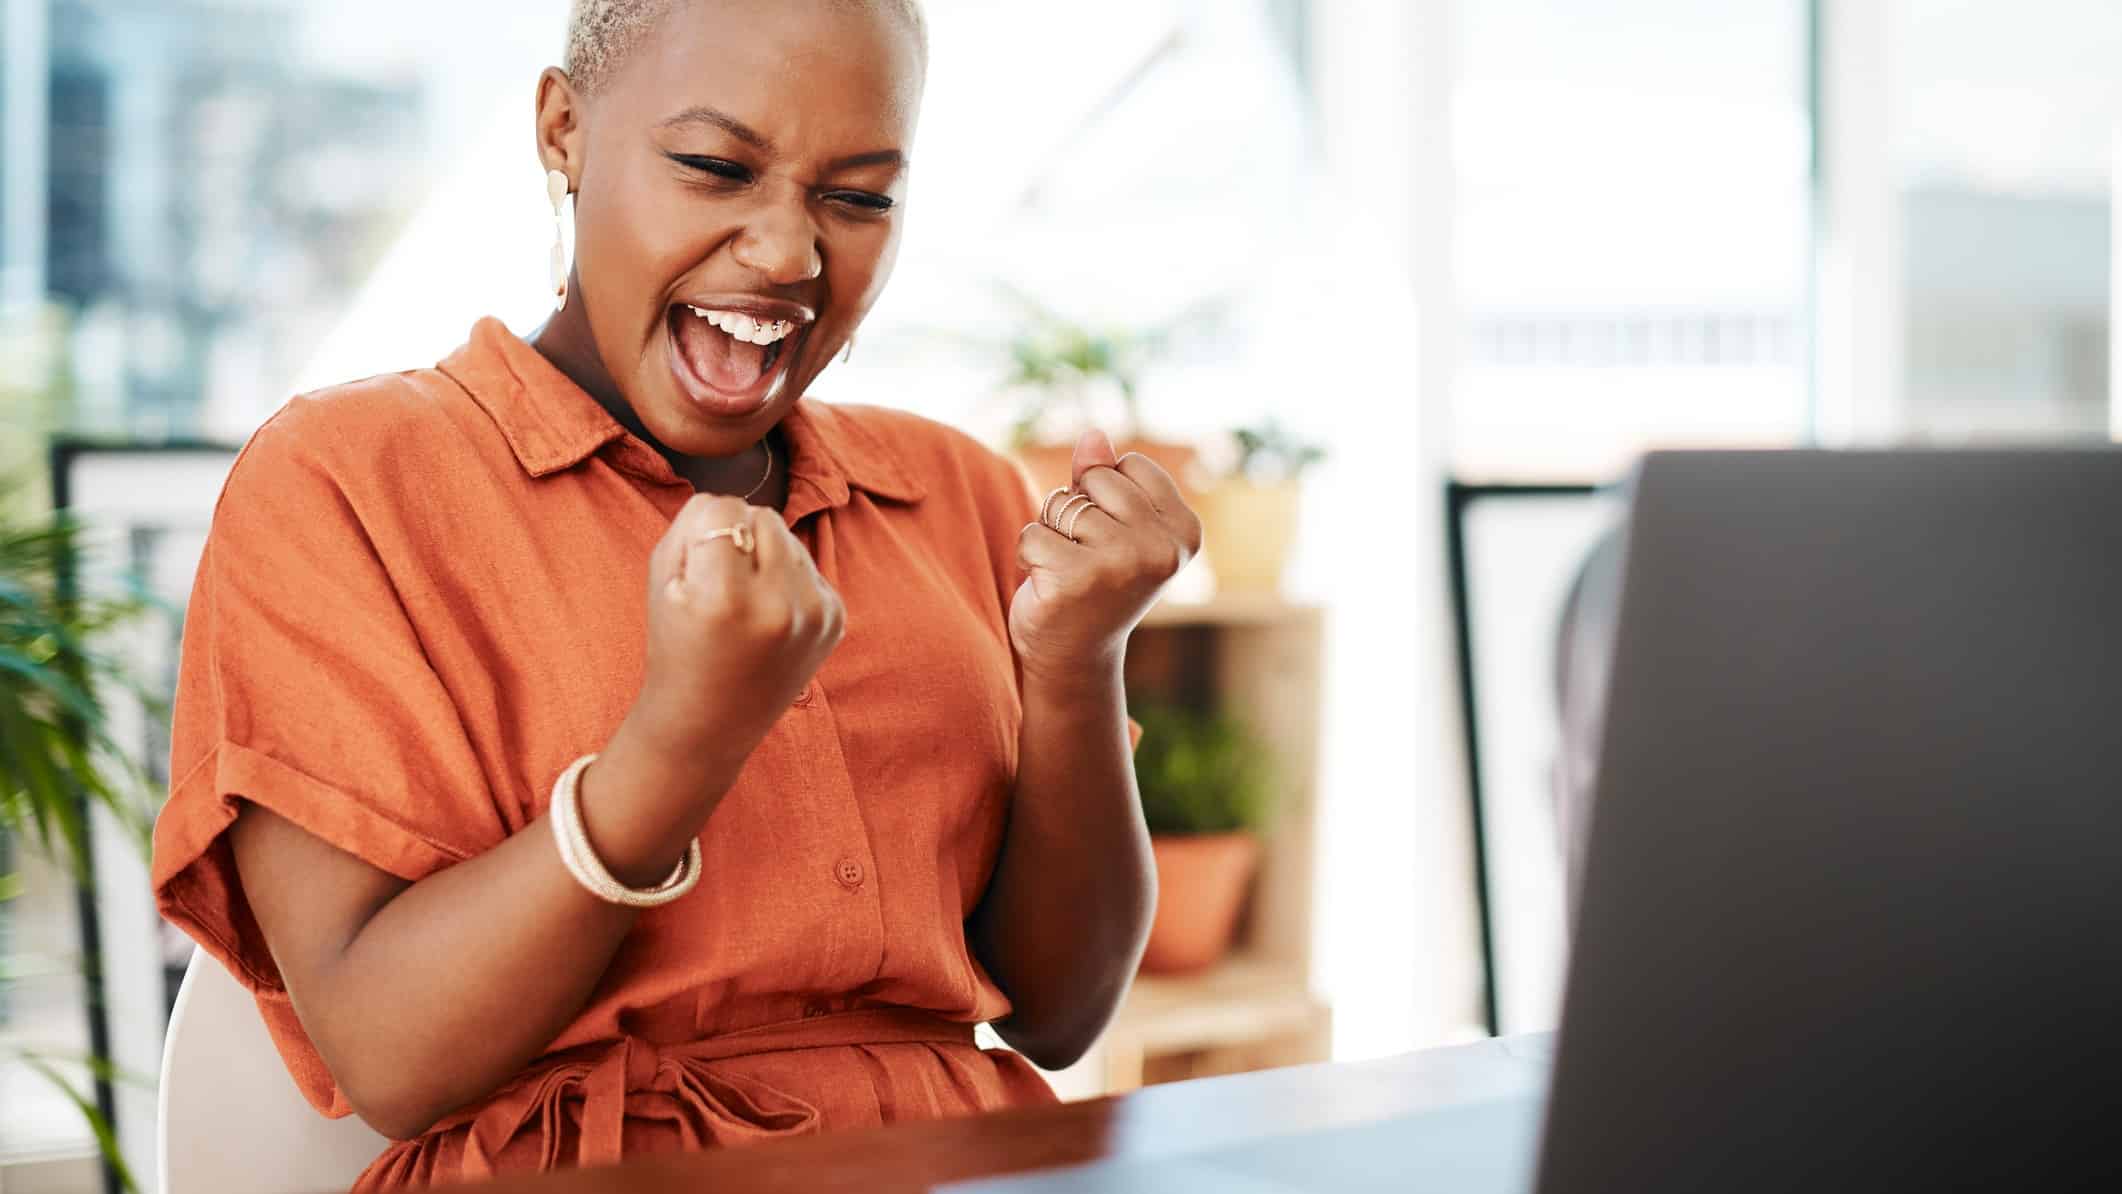 A young women pumps her fists in excitement after seeing some good news on her laptop regarding the NRW share price